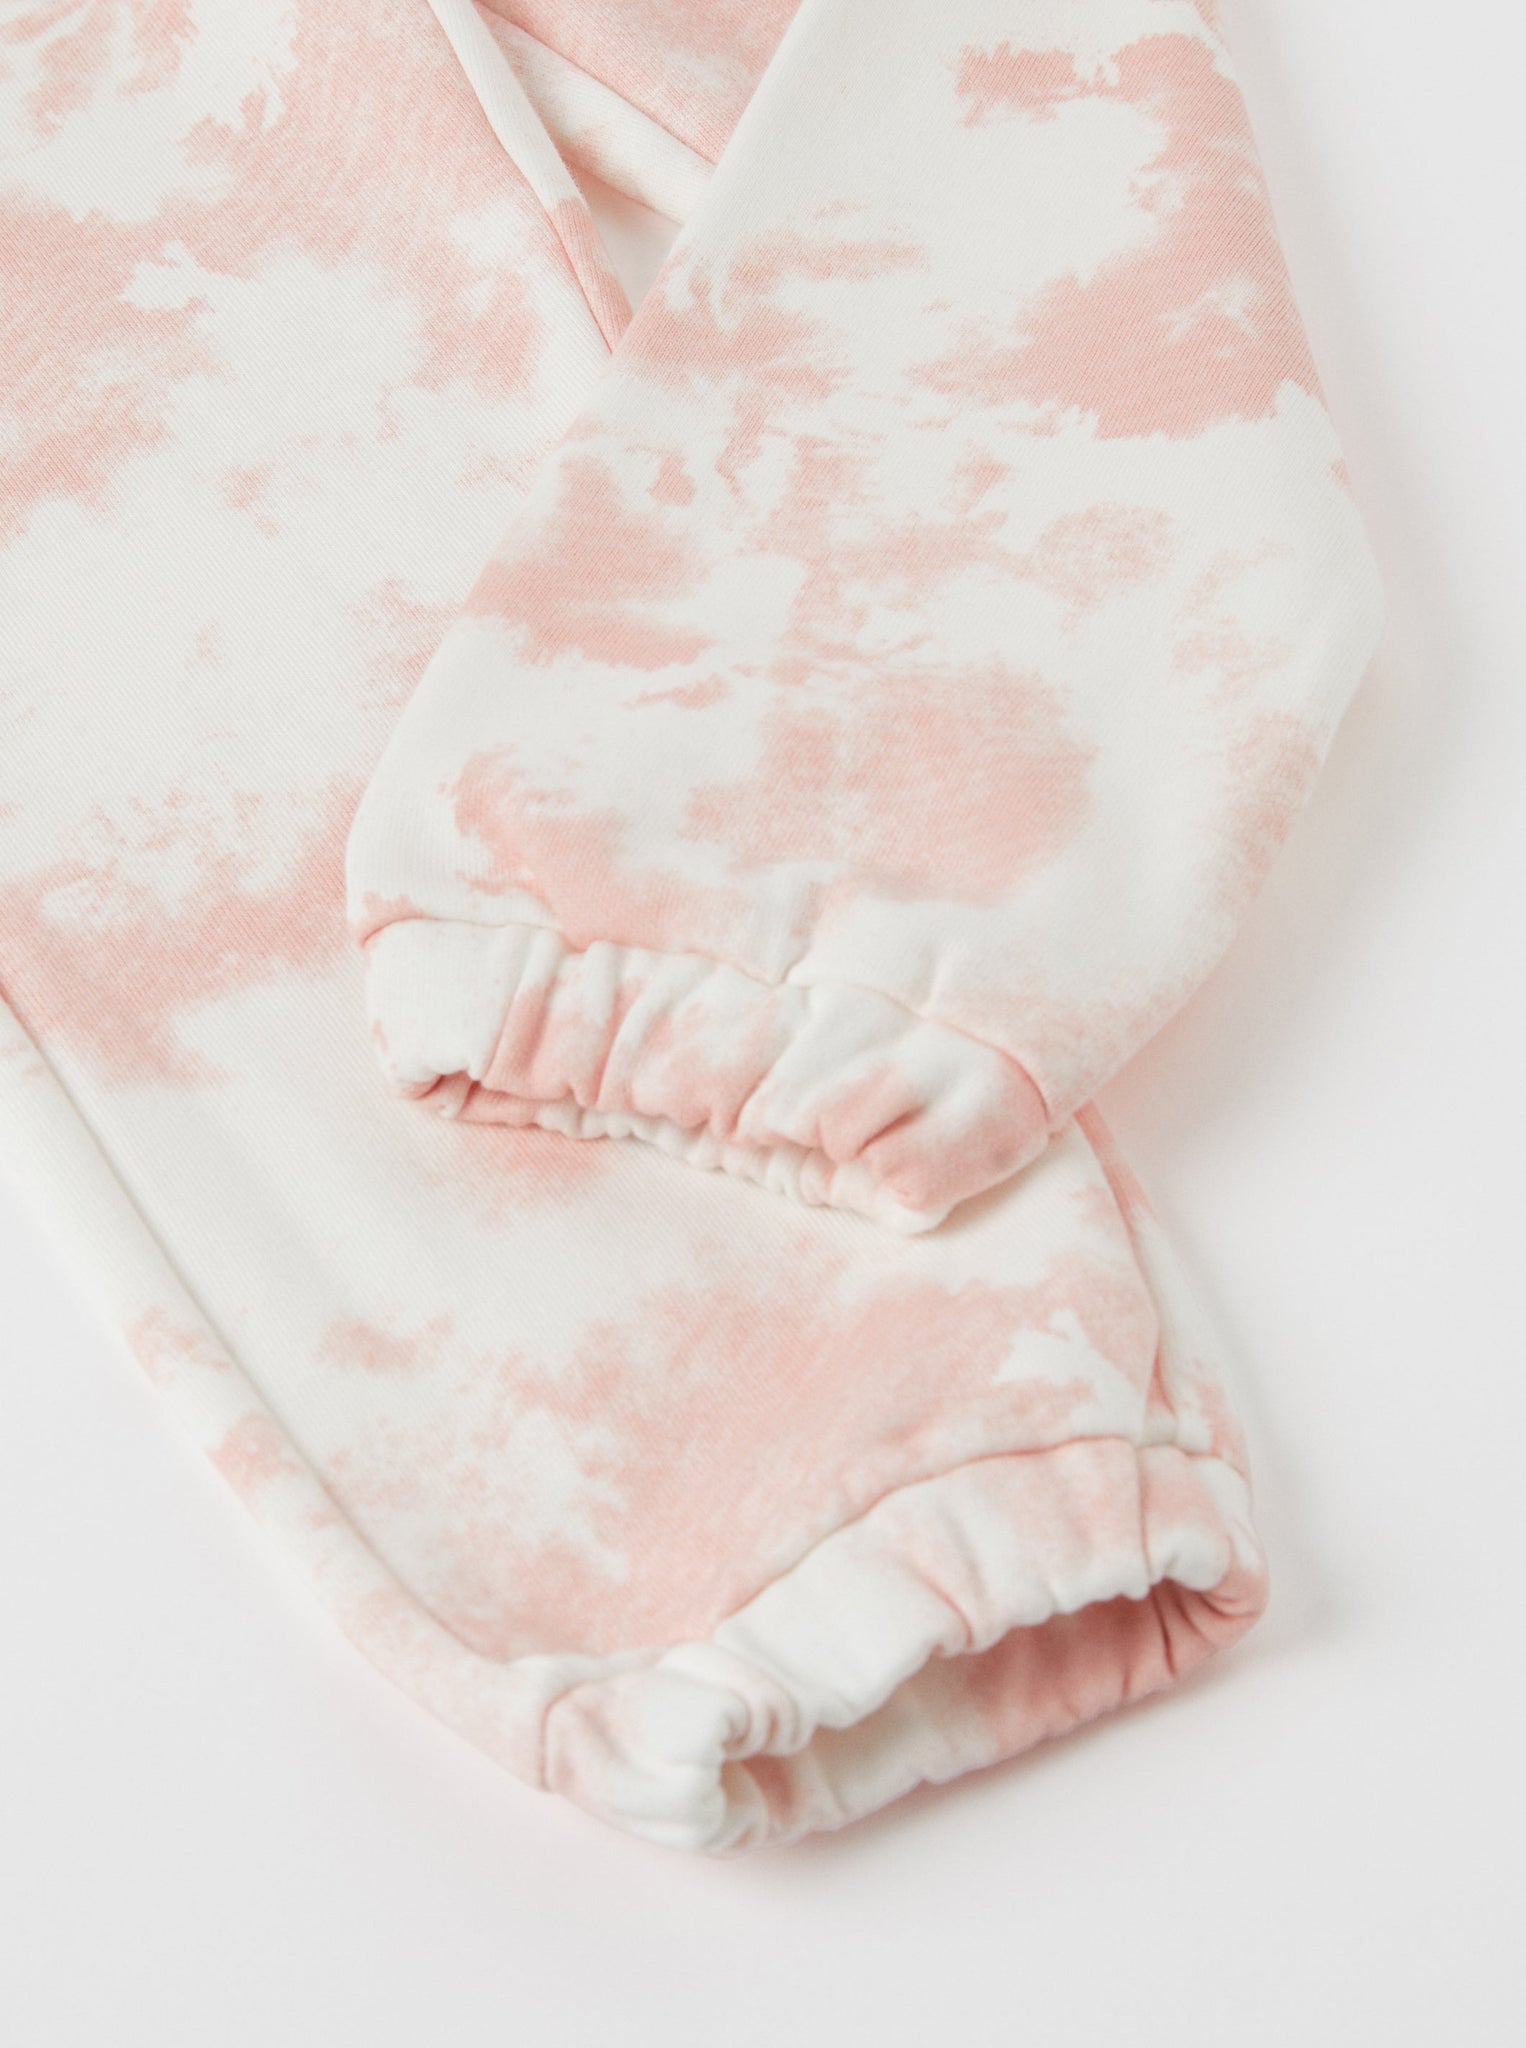 Tie-Dye Pink Kids Joggers from the Polarn O. Pyret kidswear collection. Ethically produced kids clothing.